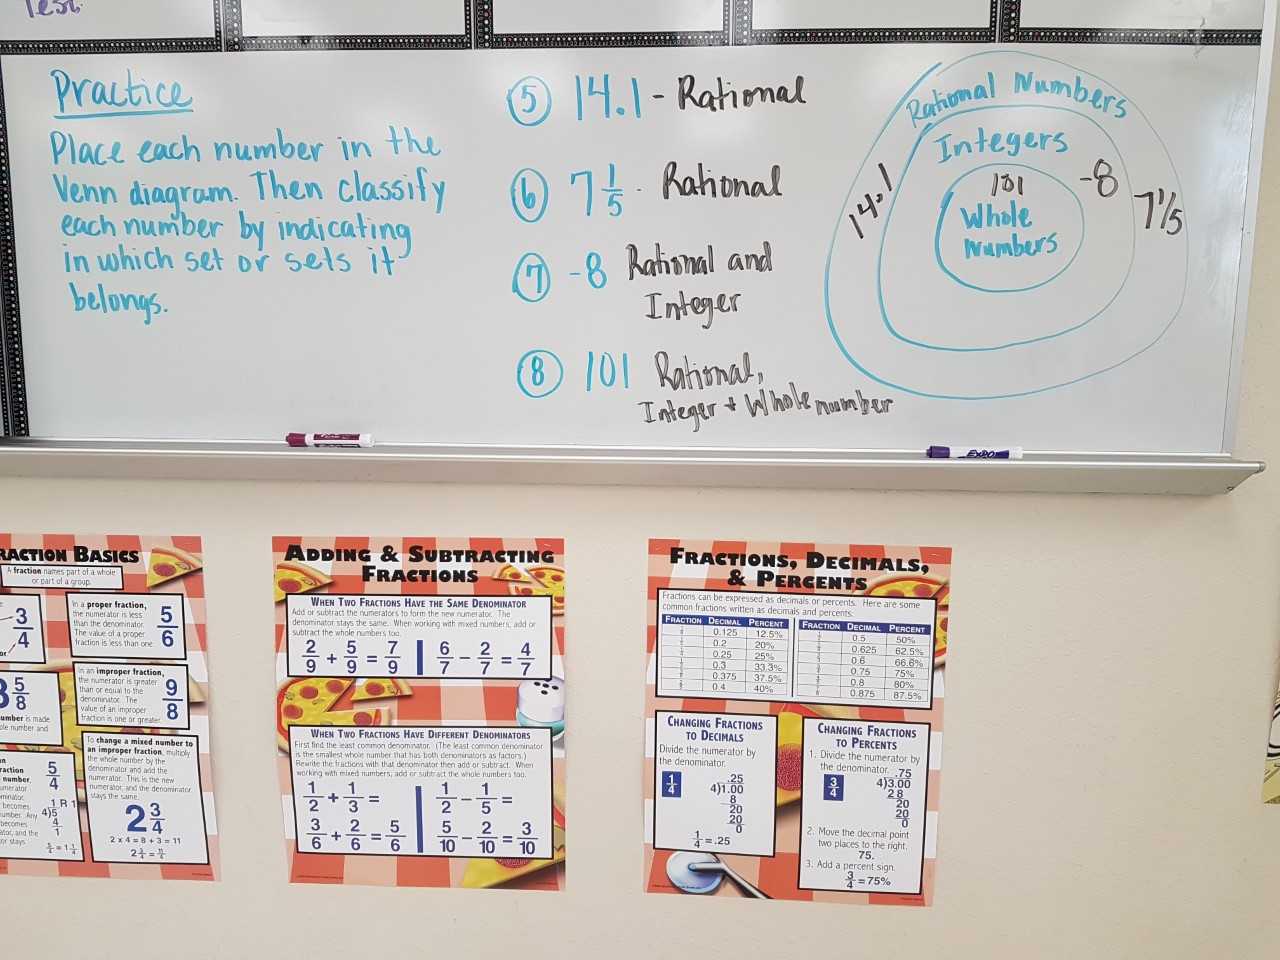 Mrs. Negron 6th Grade Math Class: Lesson 3.1 Classifying Rational Numbers